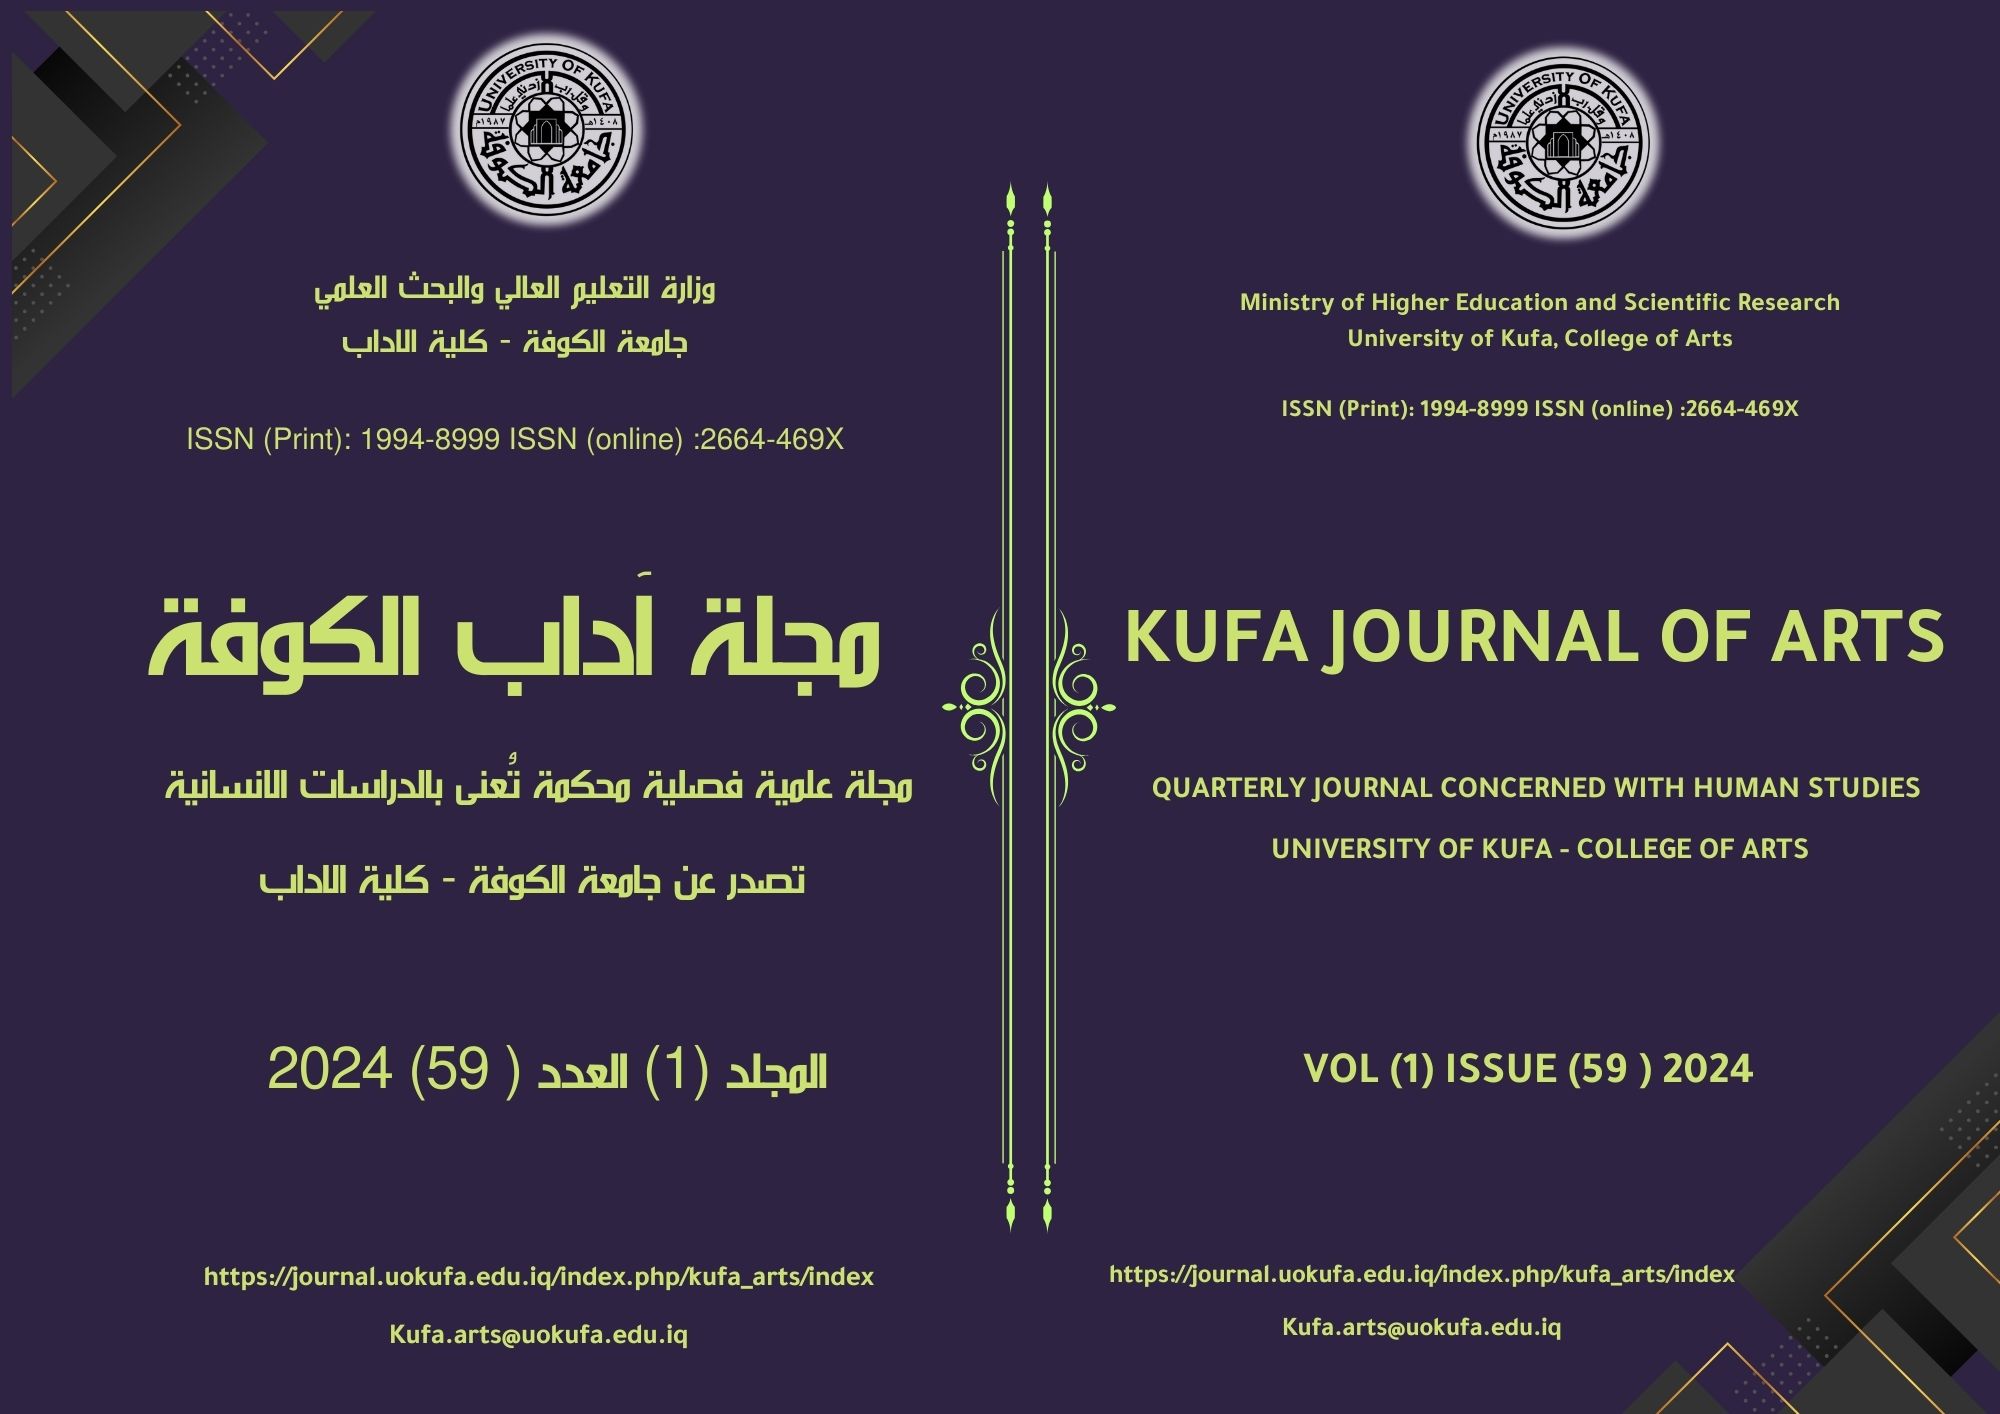 					View Vol. 1 No. 59 (2024): Kufa Journal of Arts - March 2024 
				